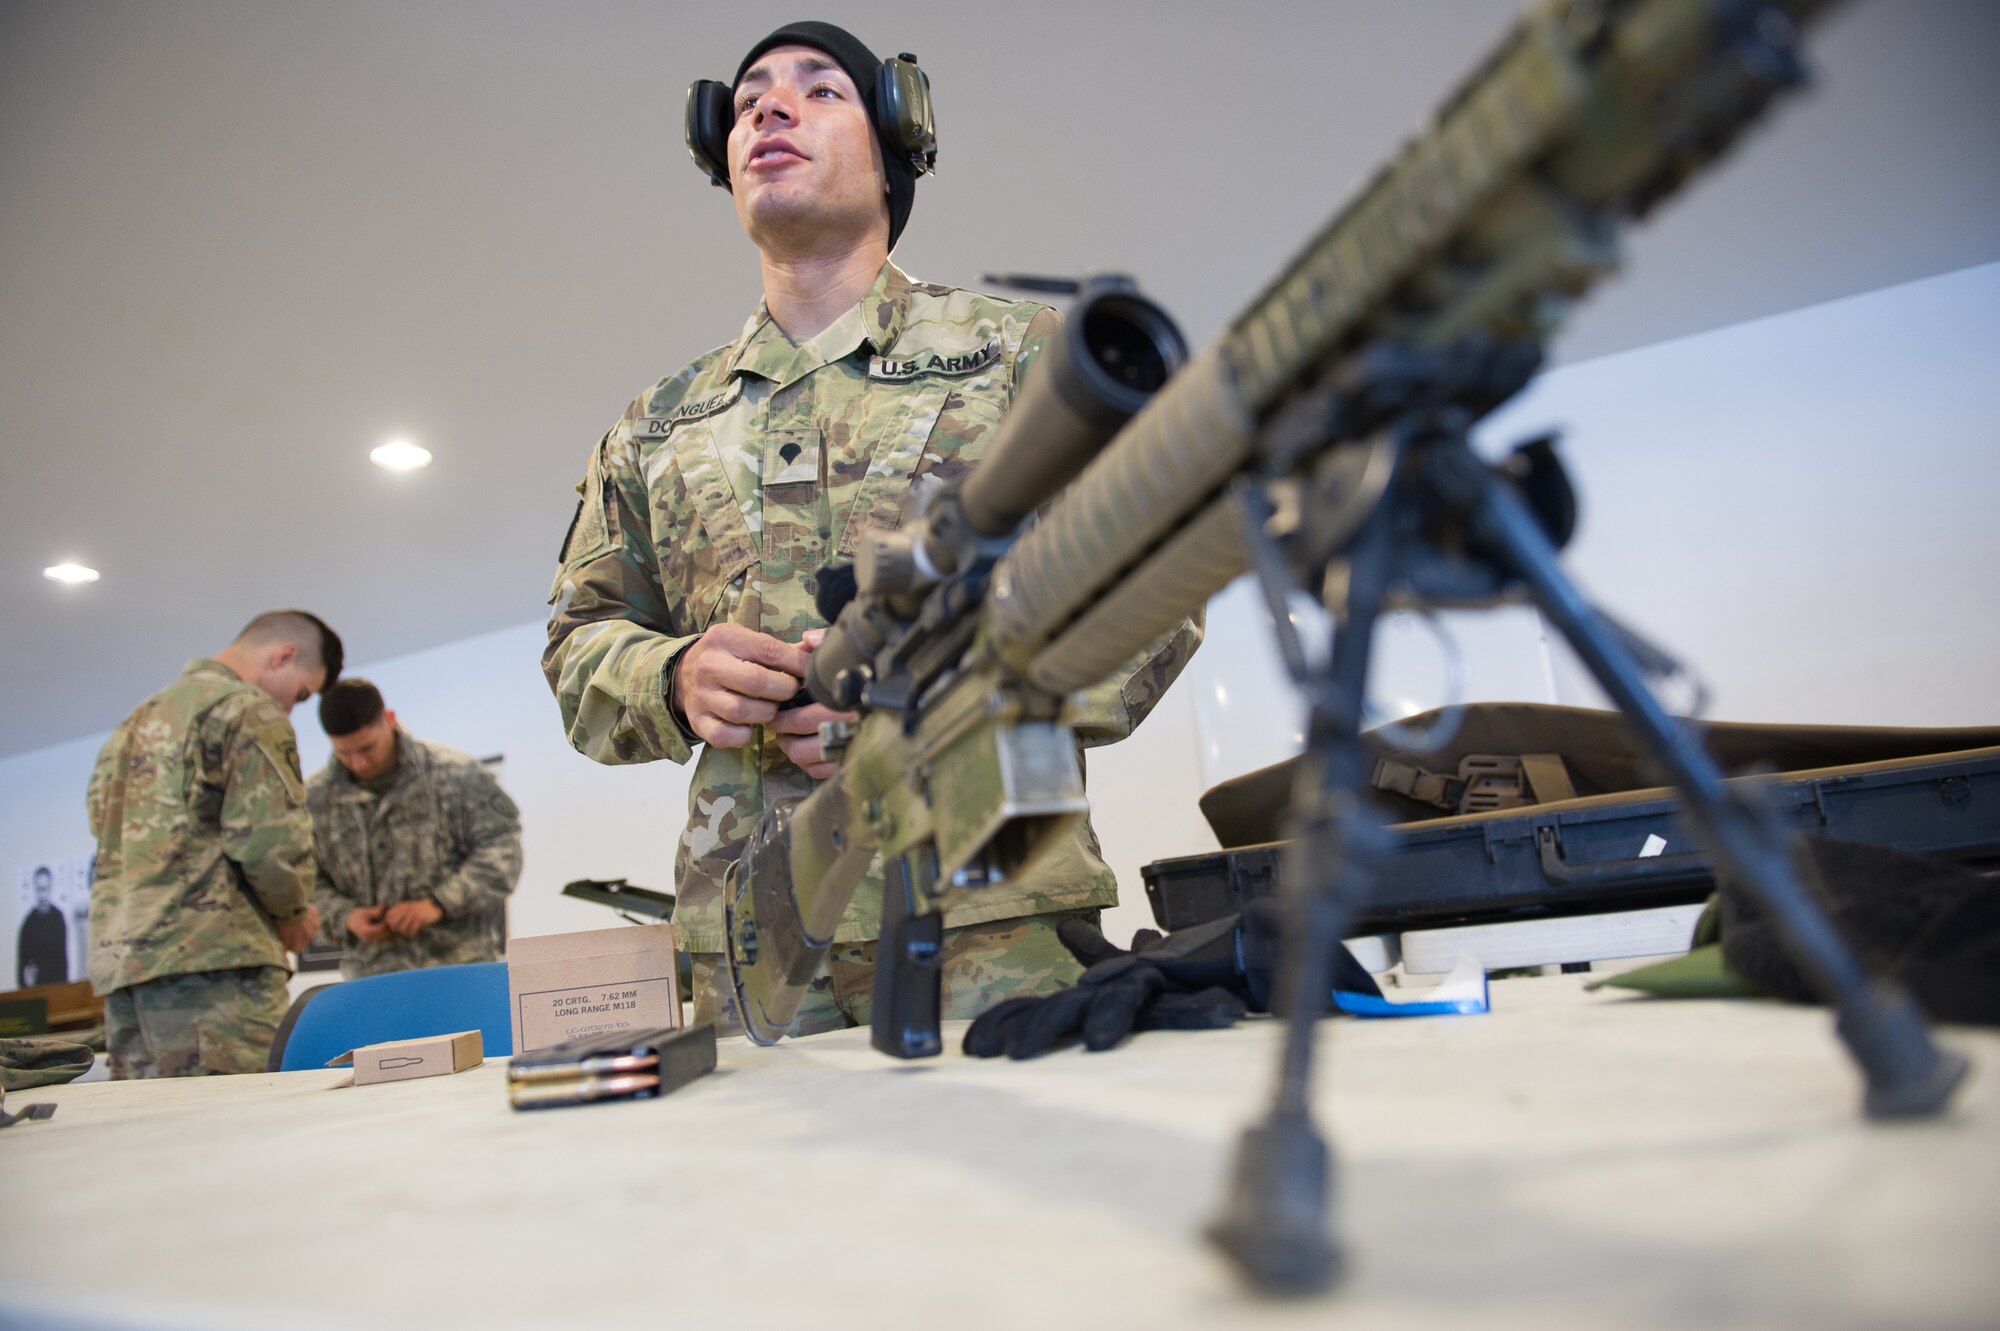 Army Spc. Arturo Dominguez, a native of Okeechobee, Fla., assigned to Charlie Troop, 1st Squadron, 40th Cavalry Regiment (Airborne), 4th Infantry Brigade Combat Team (Airborne), 25th Infantry Division, U.S. Army Alaska, loads ammunition into magazines before training with his M110 Semi-Automatic Sniper System on Statler range at Joint Base Elmendorf-Richardson, Alaska, April 6, 2018, during marksmanship training.  A sniper's main responsibility is to deliver discriminatory, highly accurate rifle fire against enemy targets that cannot be engaged successfully by the regular rifleman due to range, size, location, fleeting nature, or visibility.